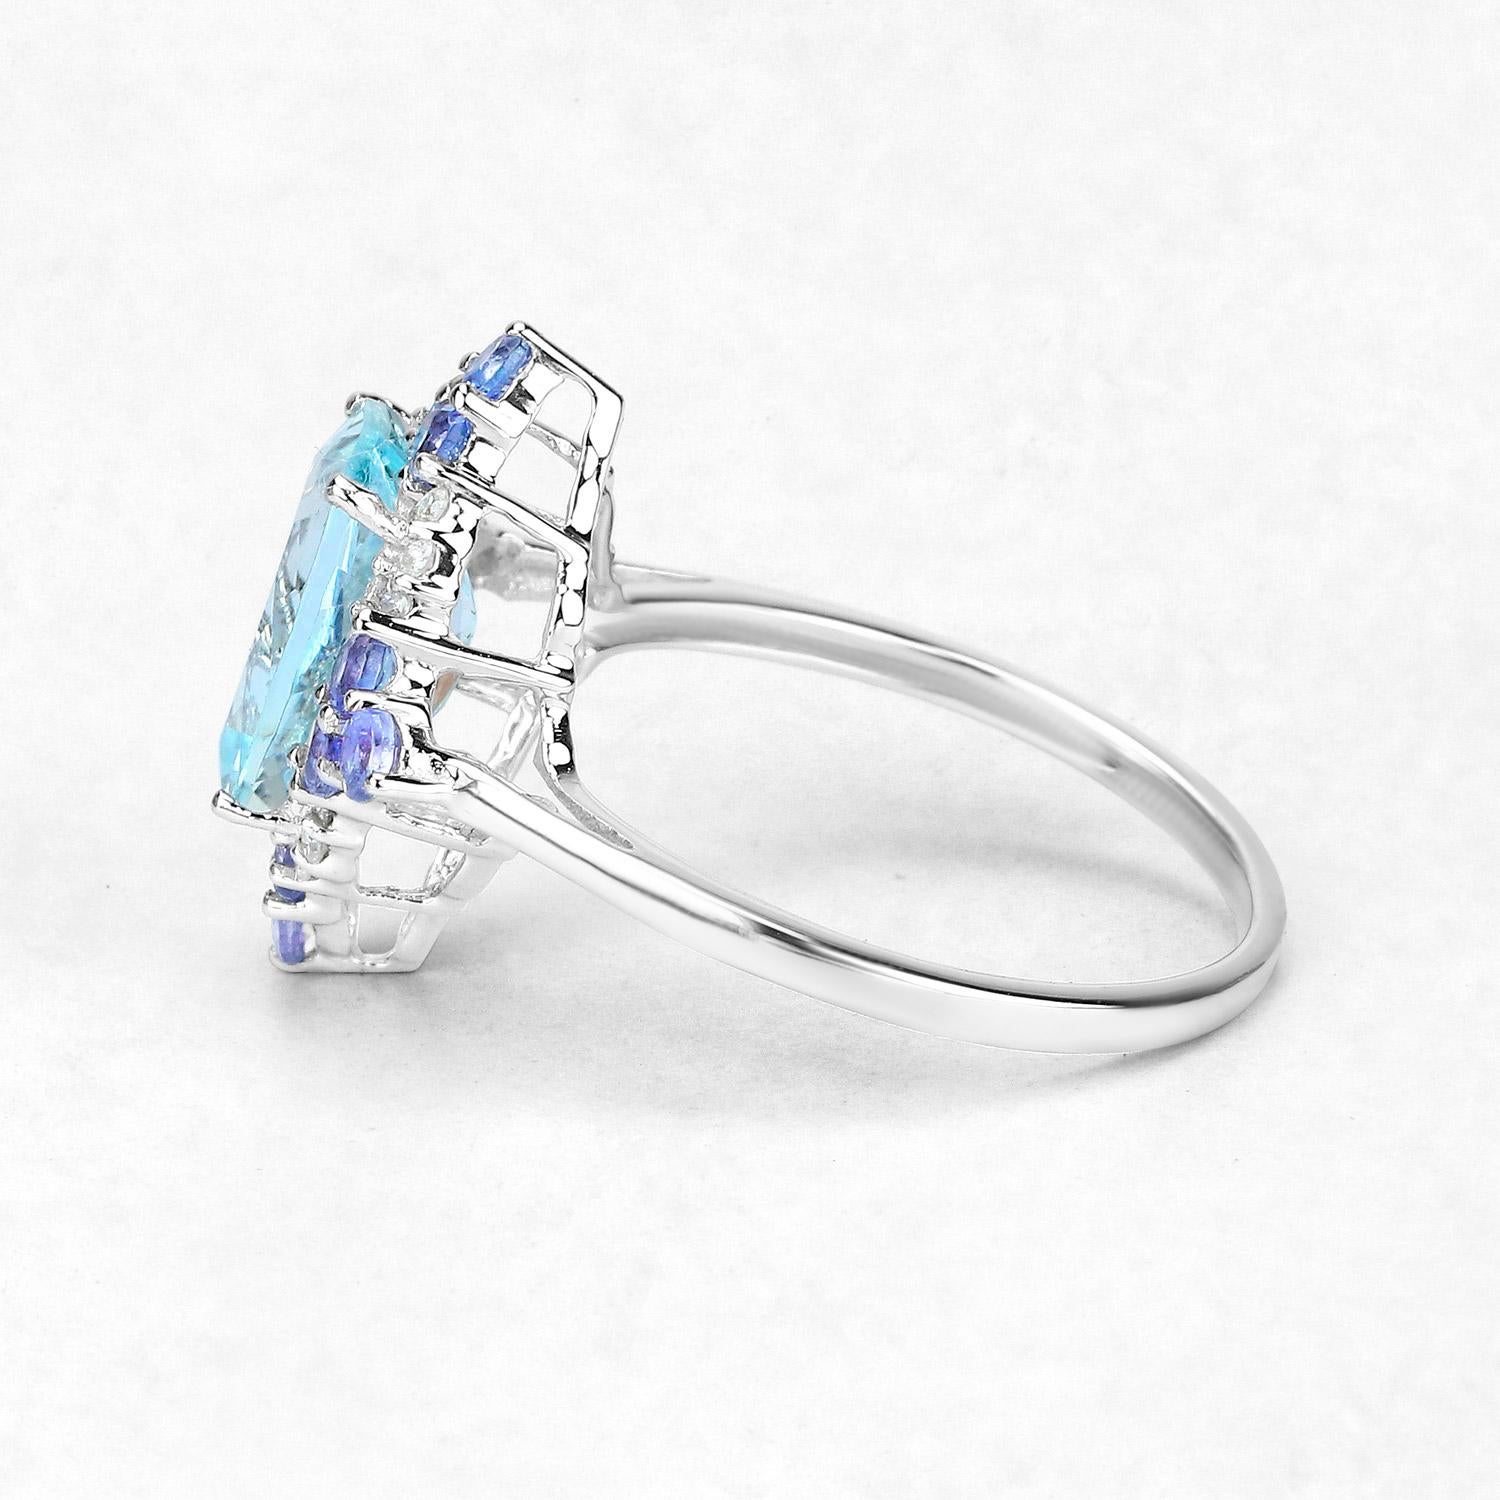 Aquamarine Ring With Tanzanites and Diamonds 2.25 Carats 10K White Gold In Excellent Condition For Sale In Laguna Niguel, CA